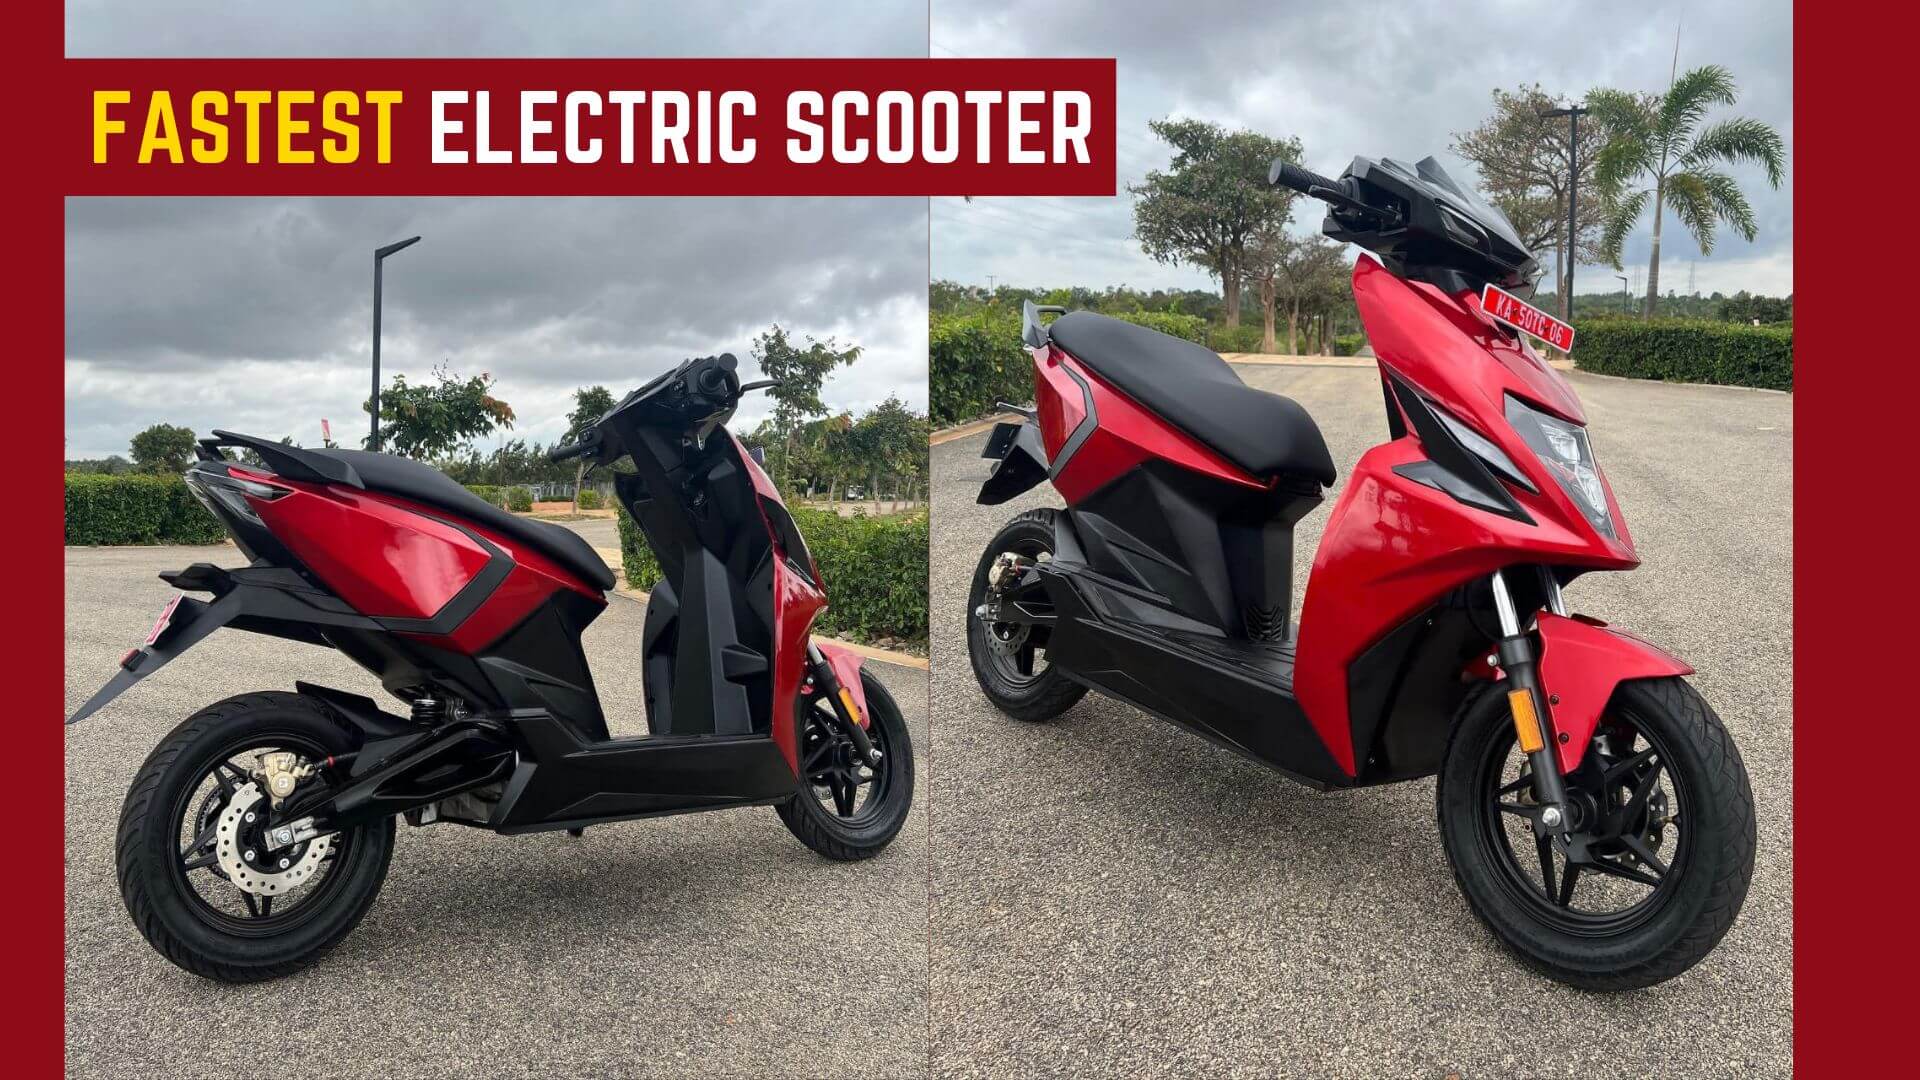 https://e-vehicleinfo.com/simple-one-fastest-electric-scooter/